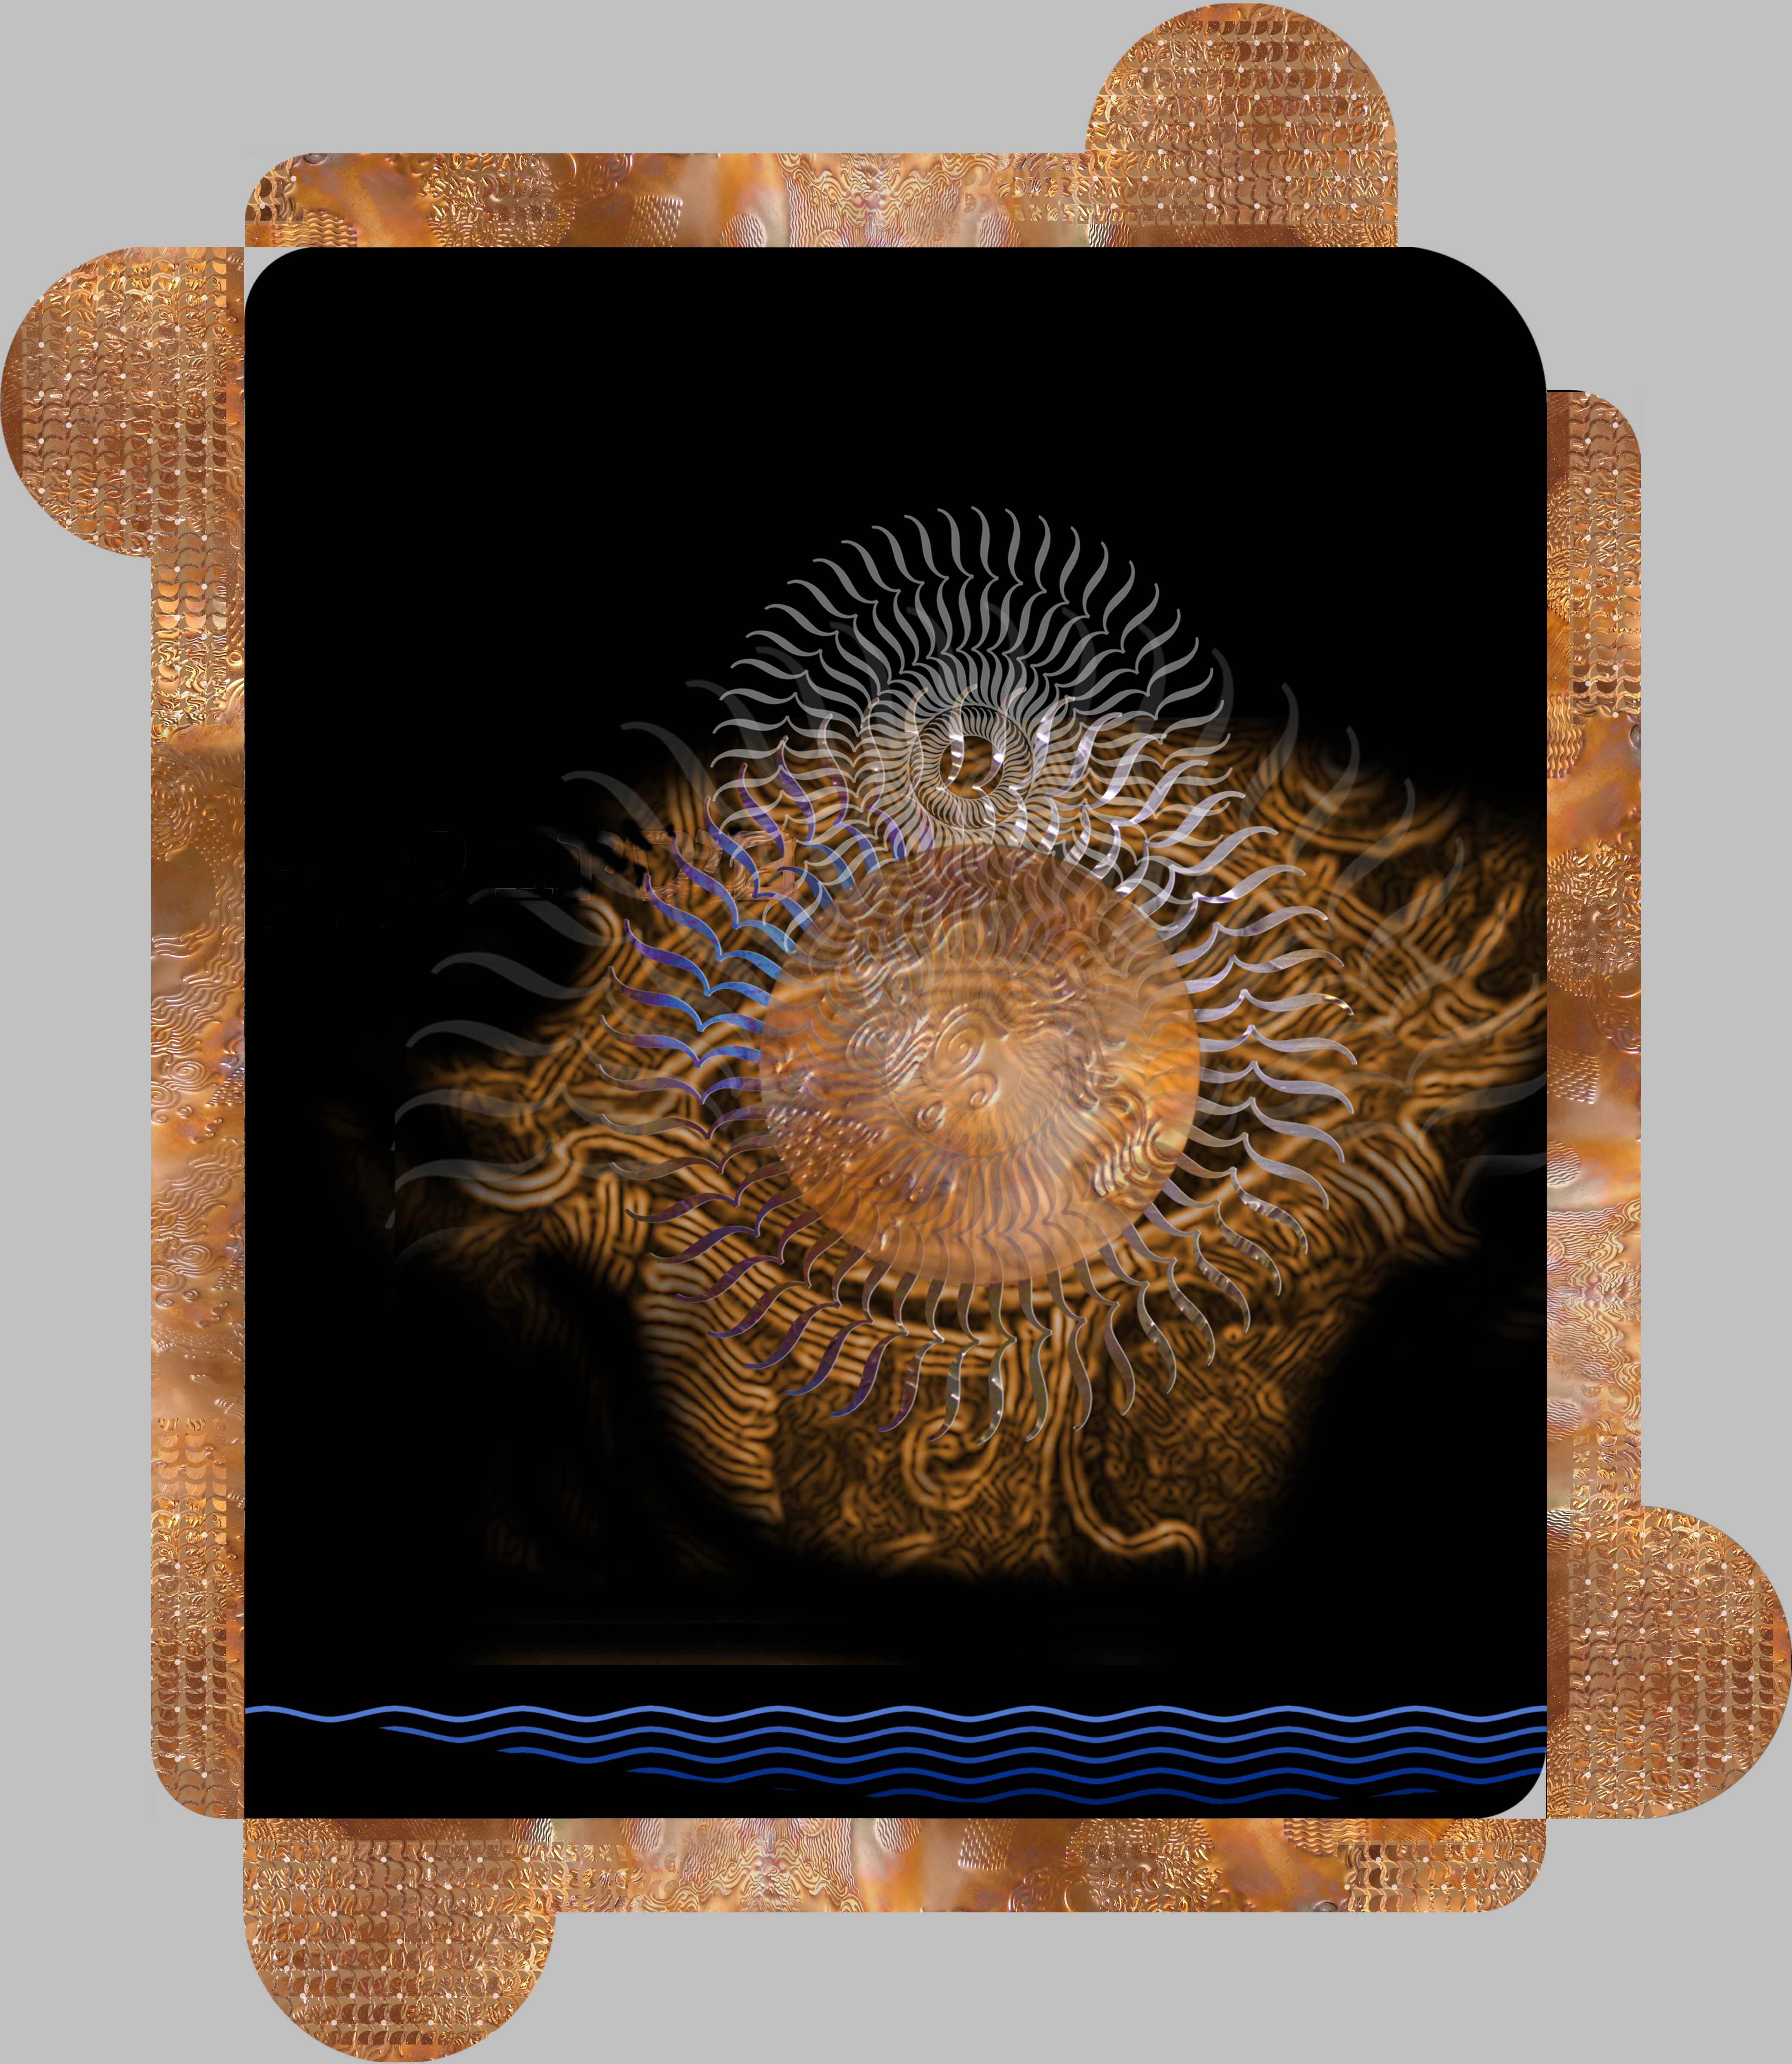 Meditation graphic: rotated "{" stylized eye with copper disk over dark blue rectangle, over copper disk/rectangle frame